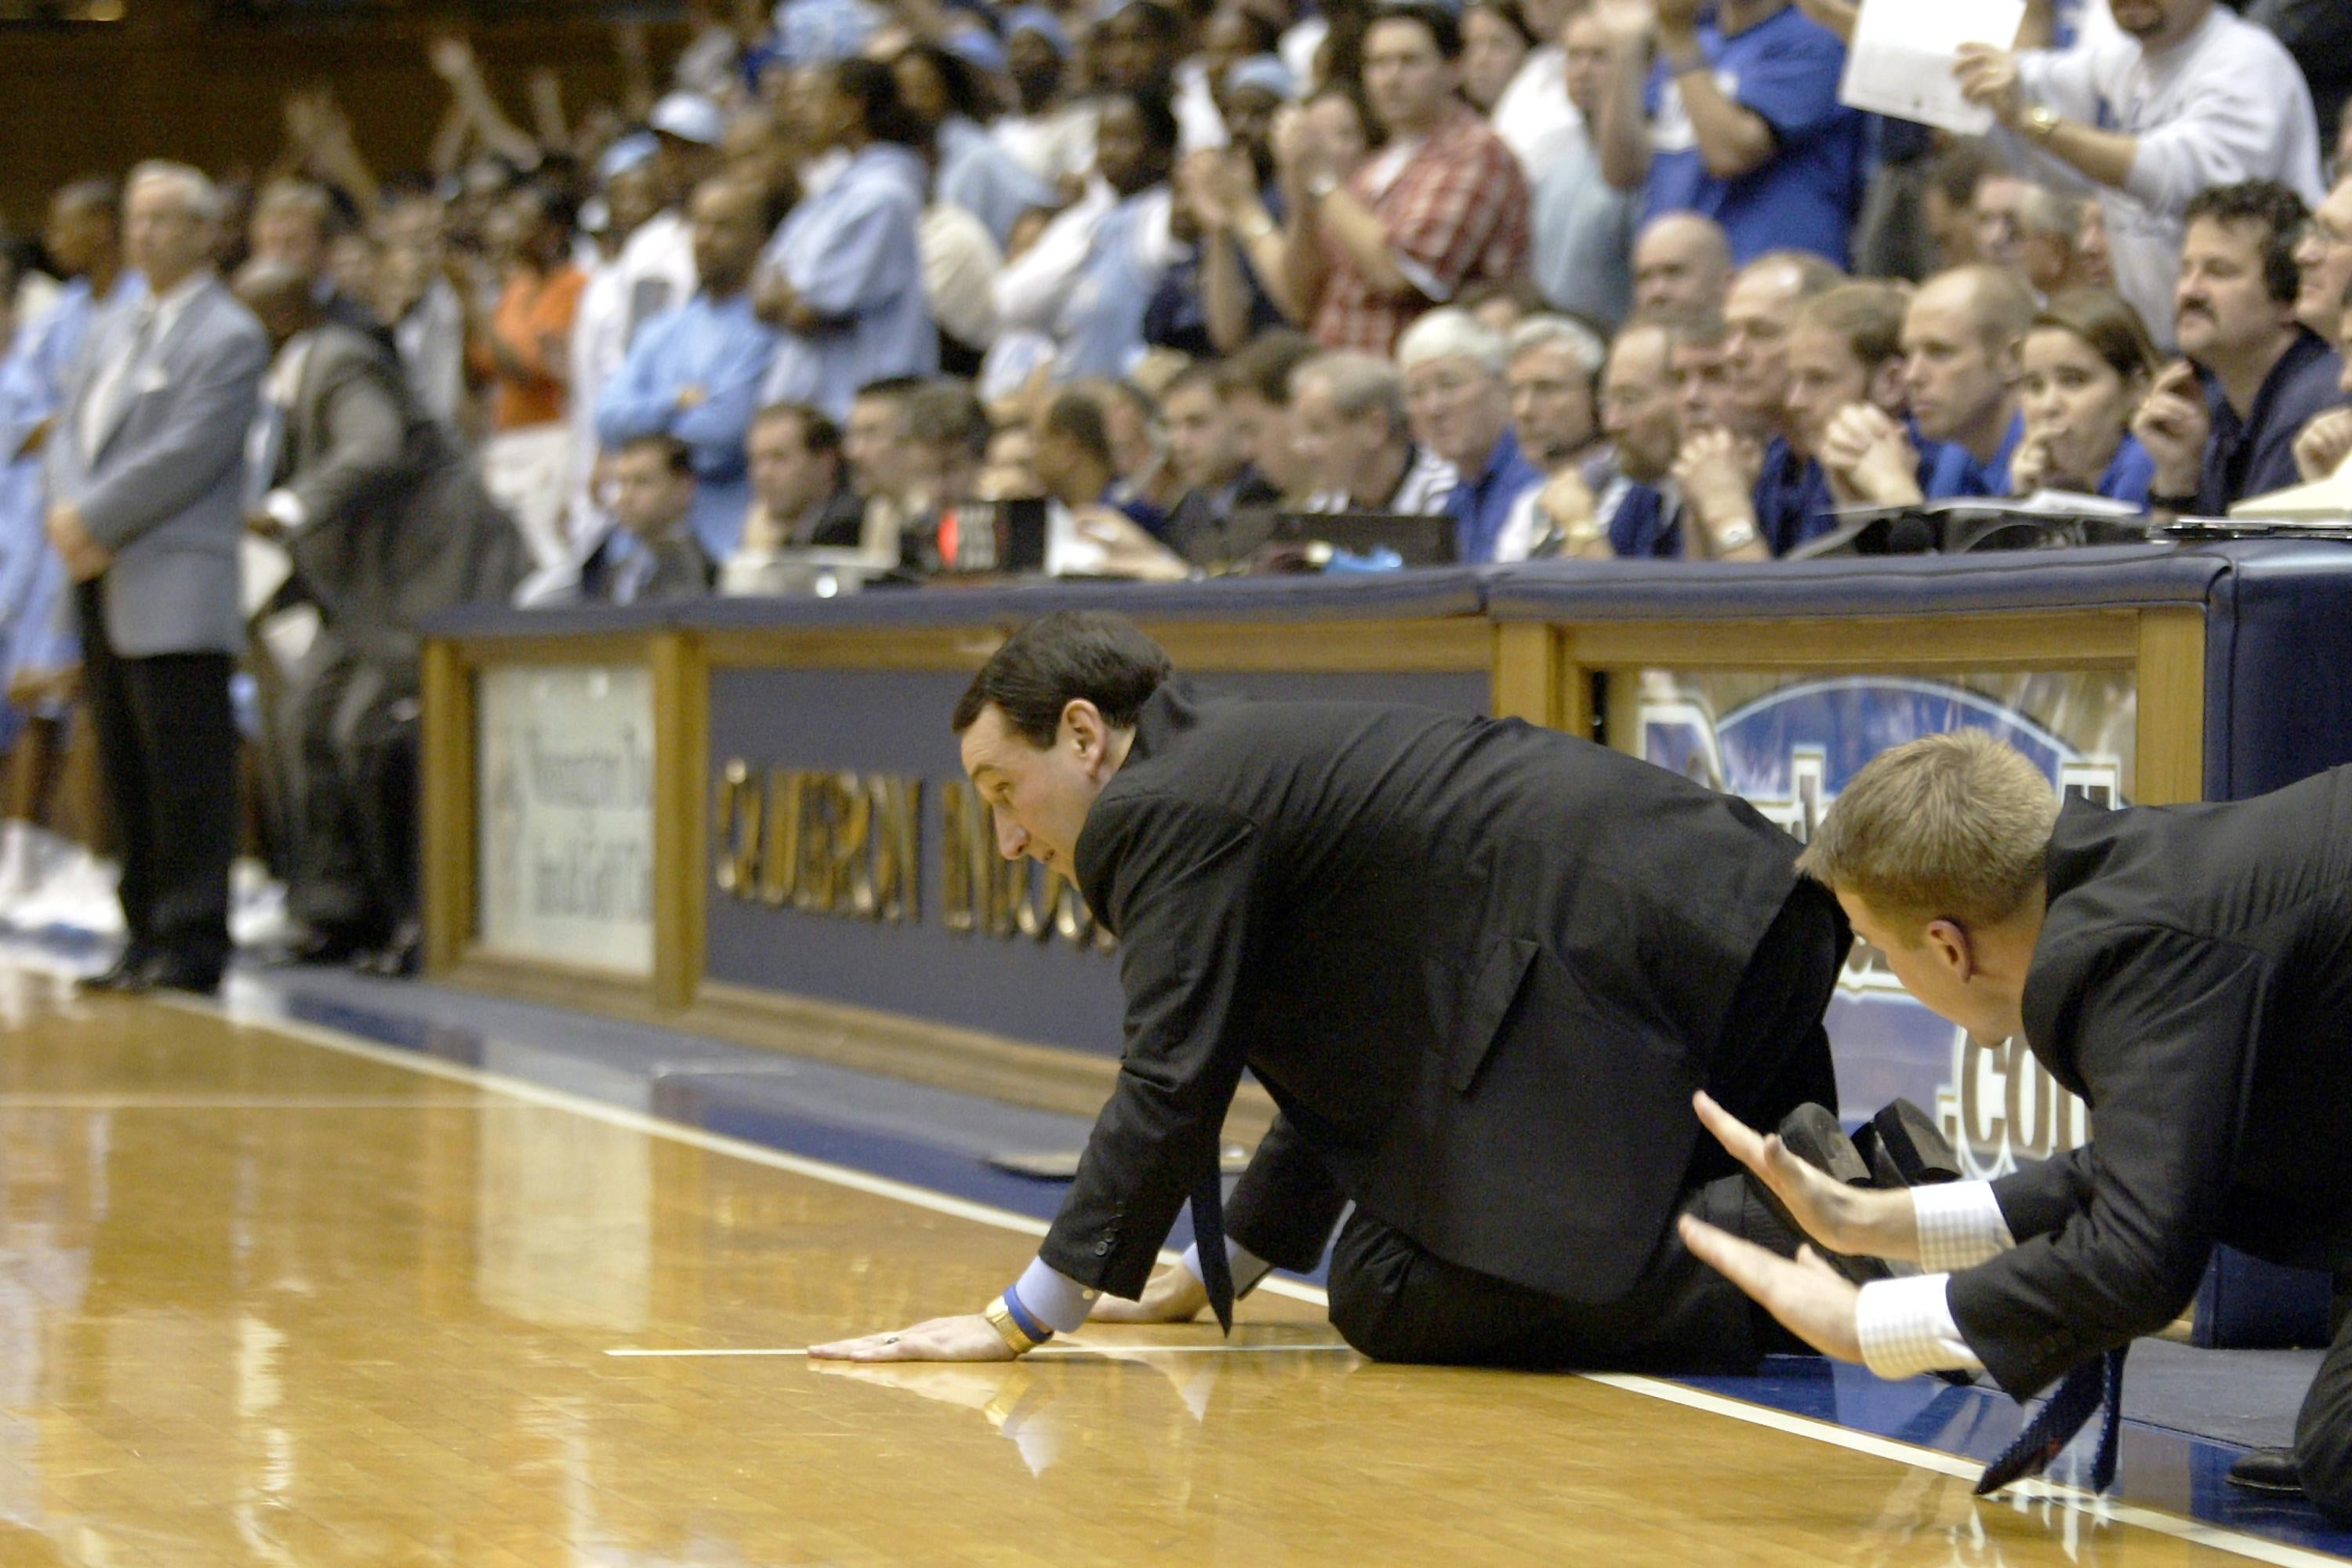 DURHAM, NC - FEBRUARY 9:  Head coach Mike Krzyzewski and assistant coach Steve Wojciechowski (R) of the Duke Blue Devils slap the floor to signal defense during their game against the North Carolina Tar Heels at Cameron Indoor Stadium on February 9, 2005 in Durham, North Carolina. Duke defeated North Carolina 71-70.  (Photo by Craig Jones/Getty Images)